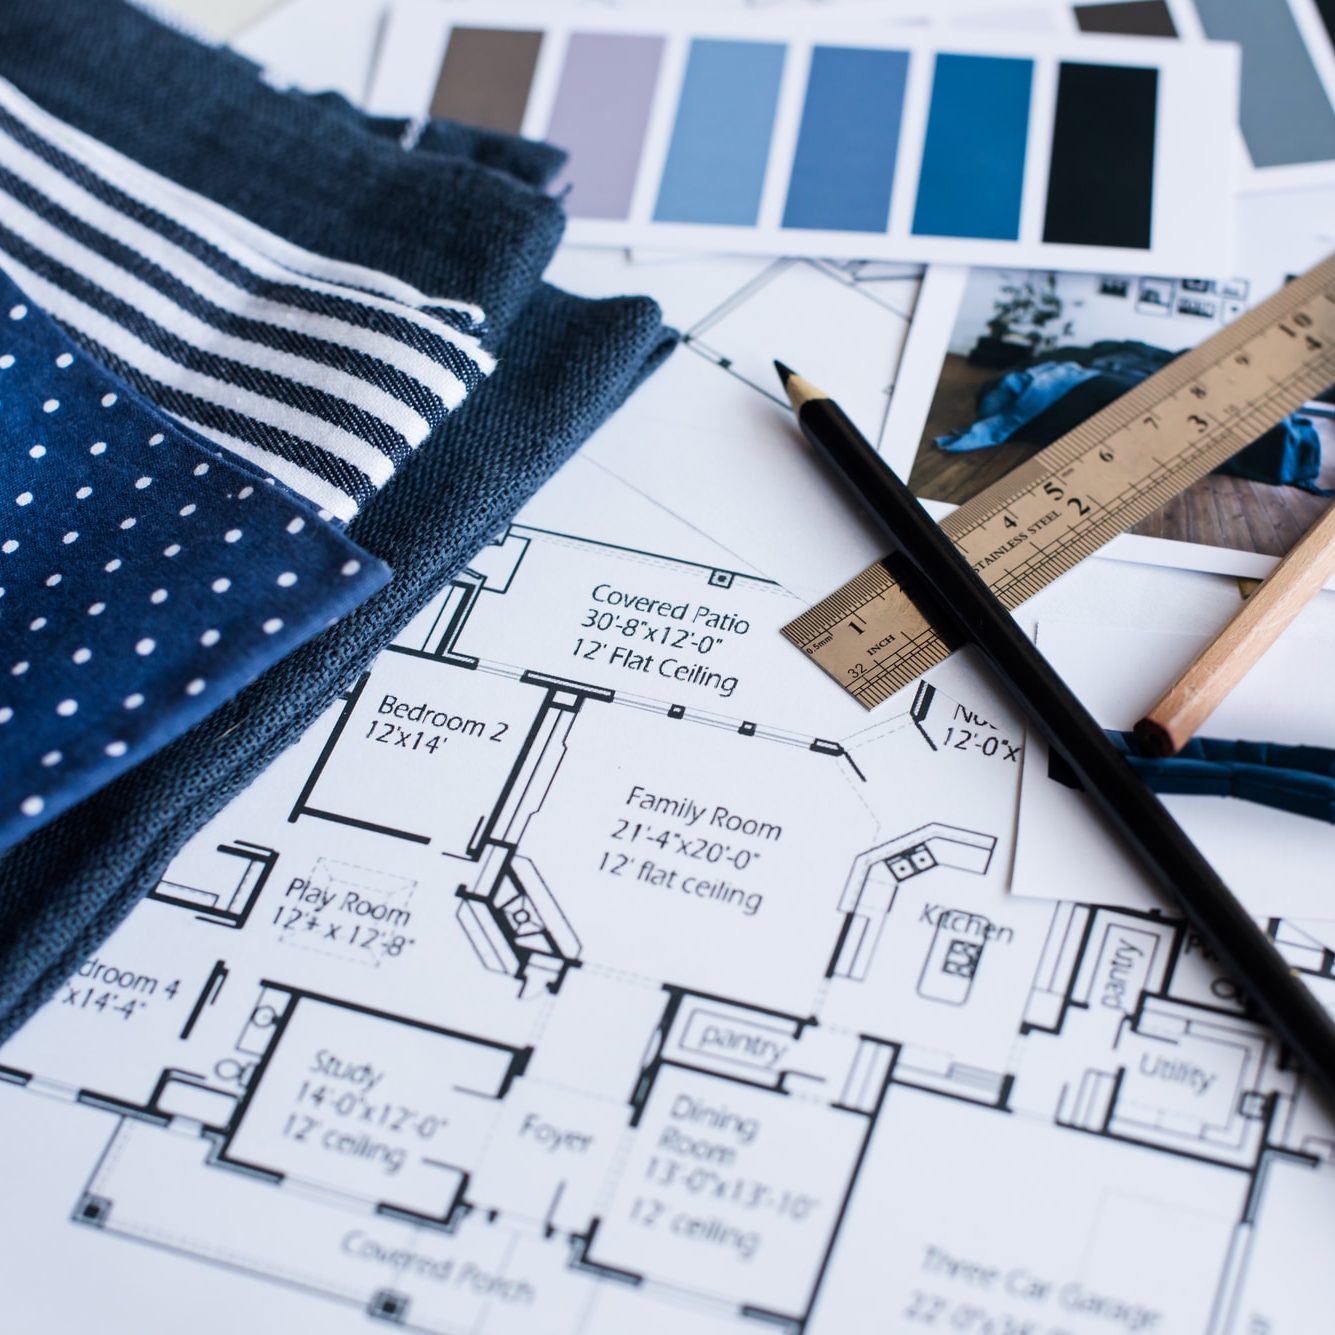 Fabric, blueprints and items used for interior design.